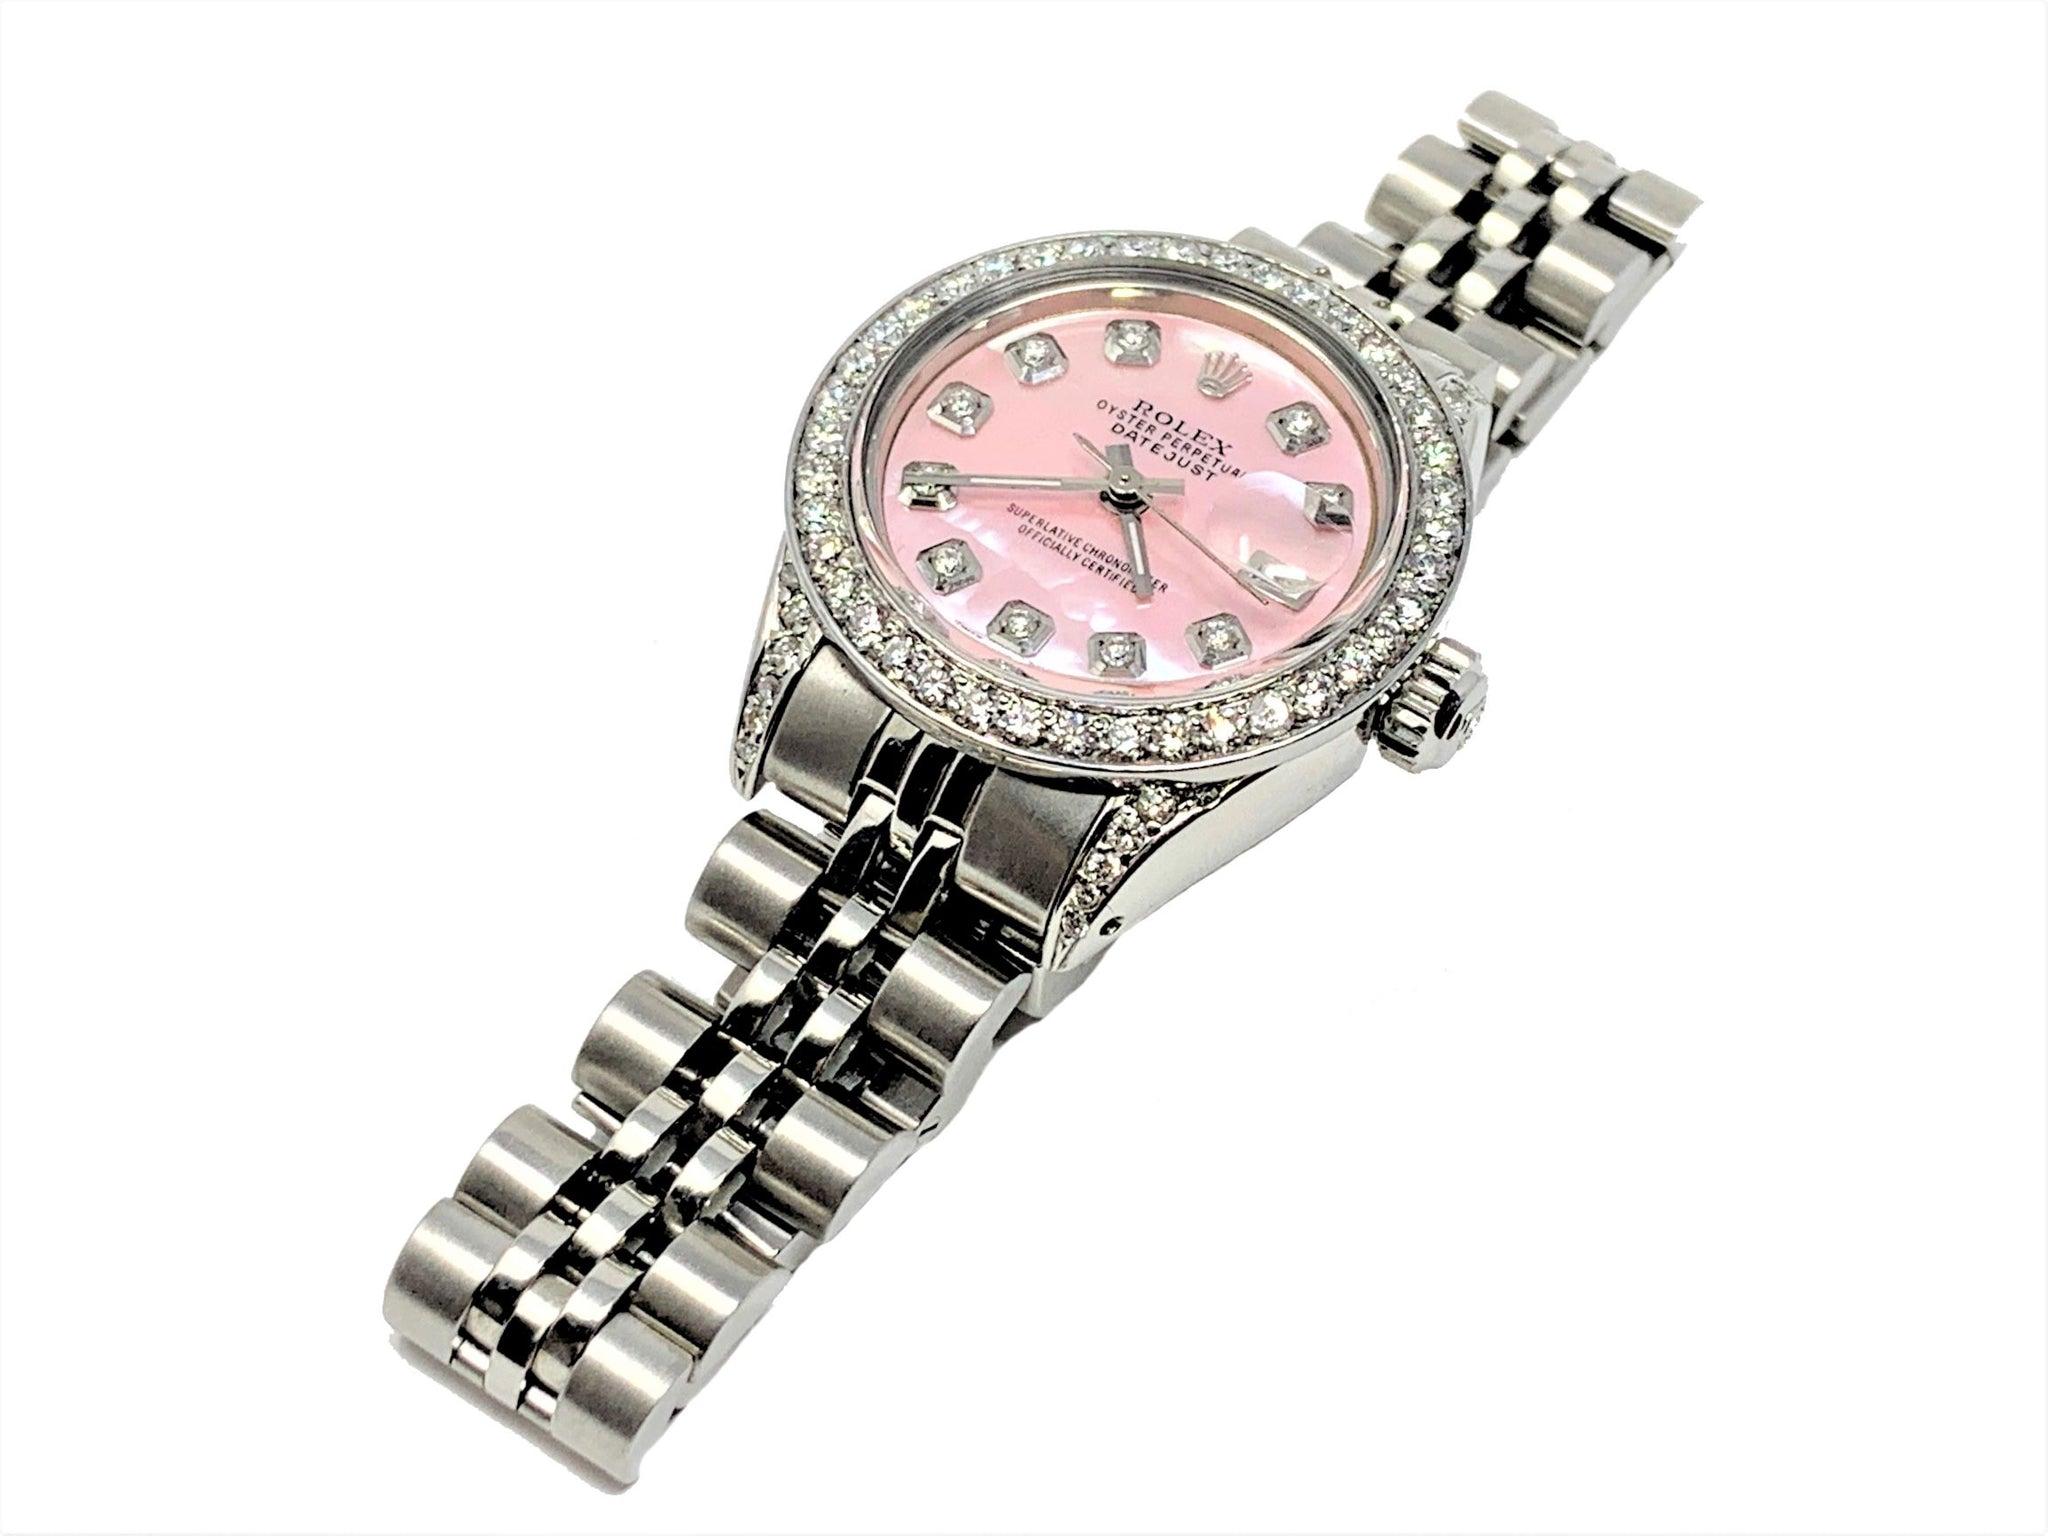 Brand - Rolex
Gender - Ladies
Condition - Pre owned
Style - Datejust 
Model - 6917
Metals - stainless steel 
Case size - 26mm
Bezel - stainless steel diamond
Crystal - sapphire
Movement - automatic caliber 2035 
Dial - Custom pink MOP Diamond
Wrist